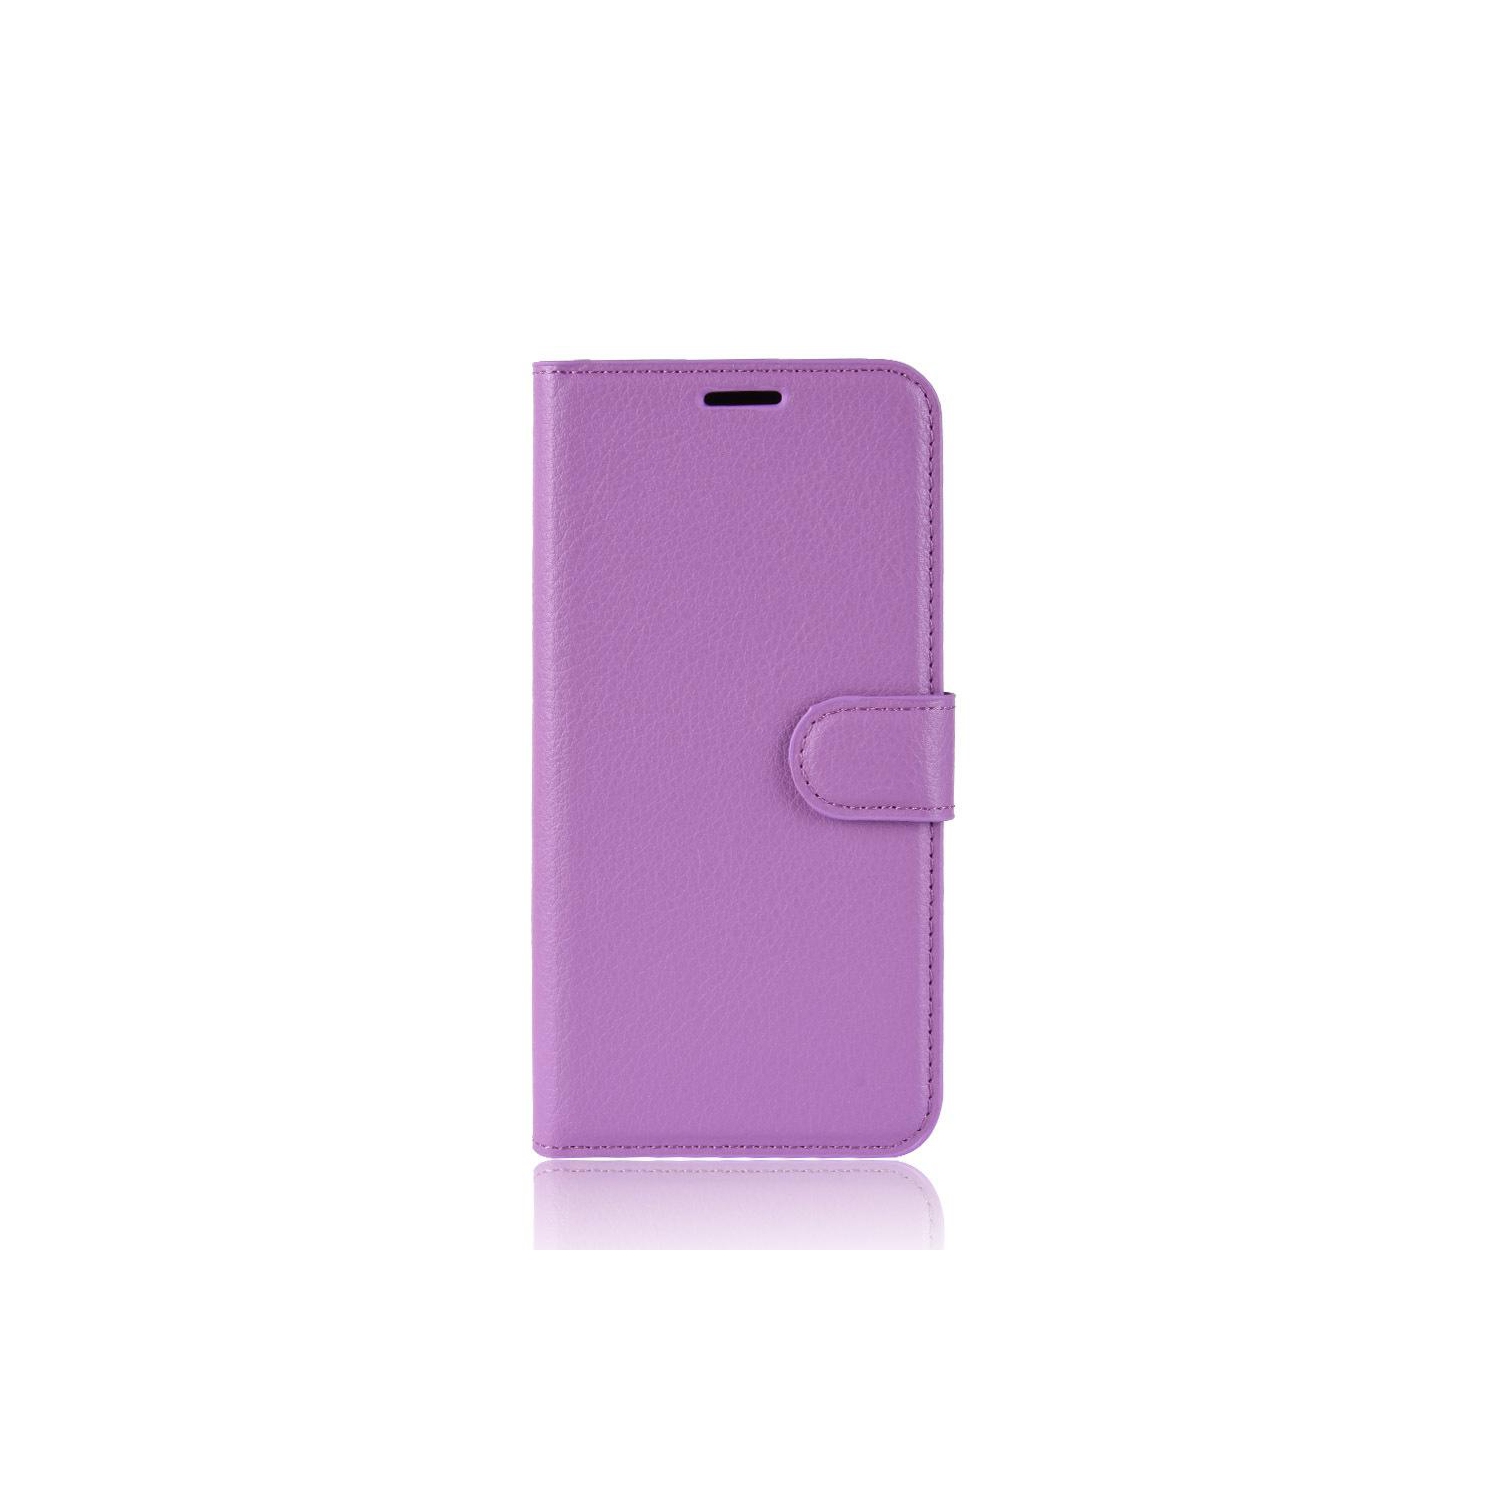 PANDACO Purple Leather Wallet Case for iPhone XS Max